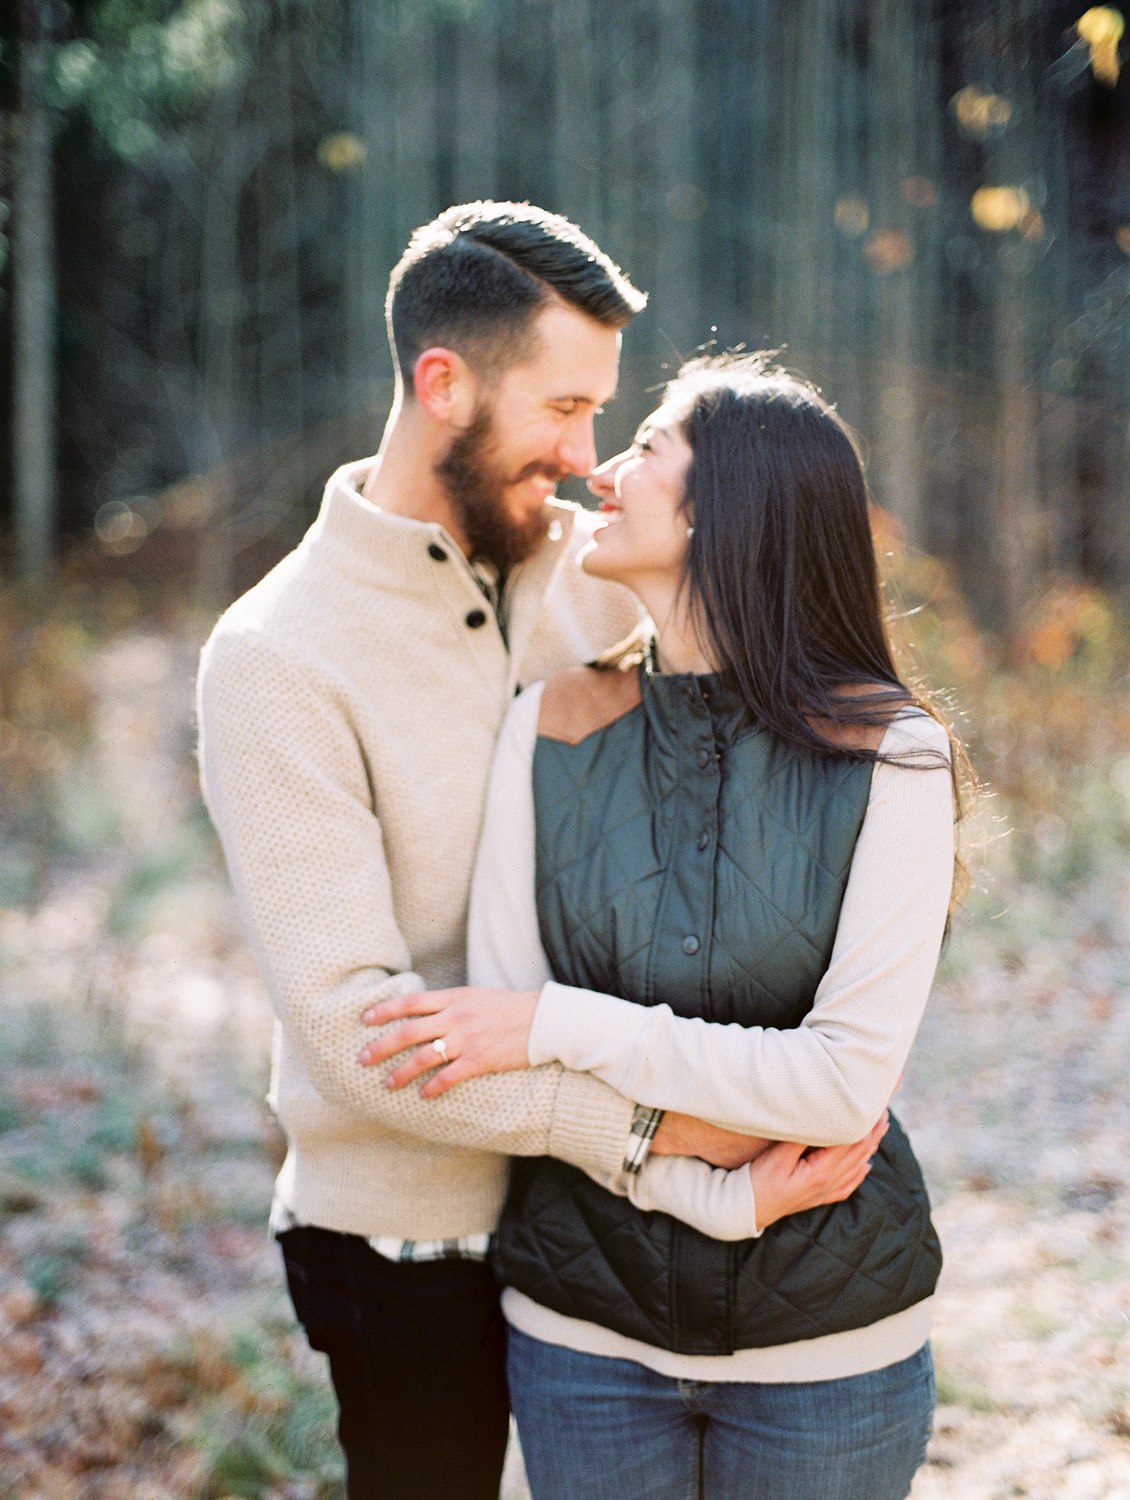 Elkmont & Spence Cabin Smoky Mountain Engagement - Stephanie + Addison ...